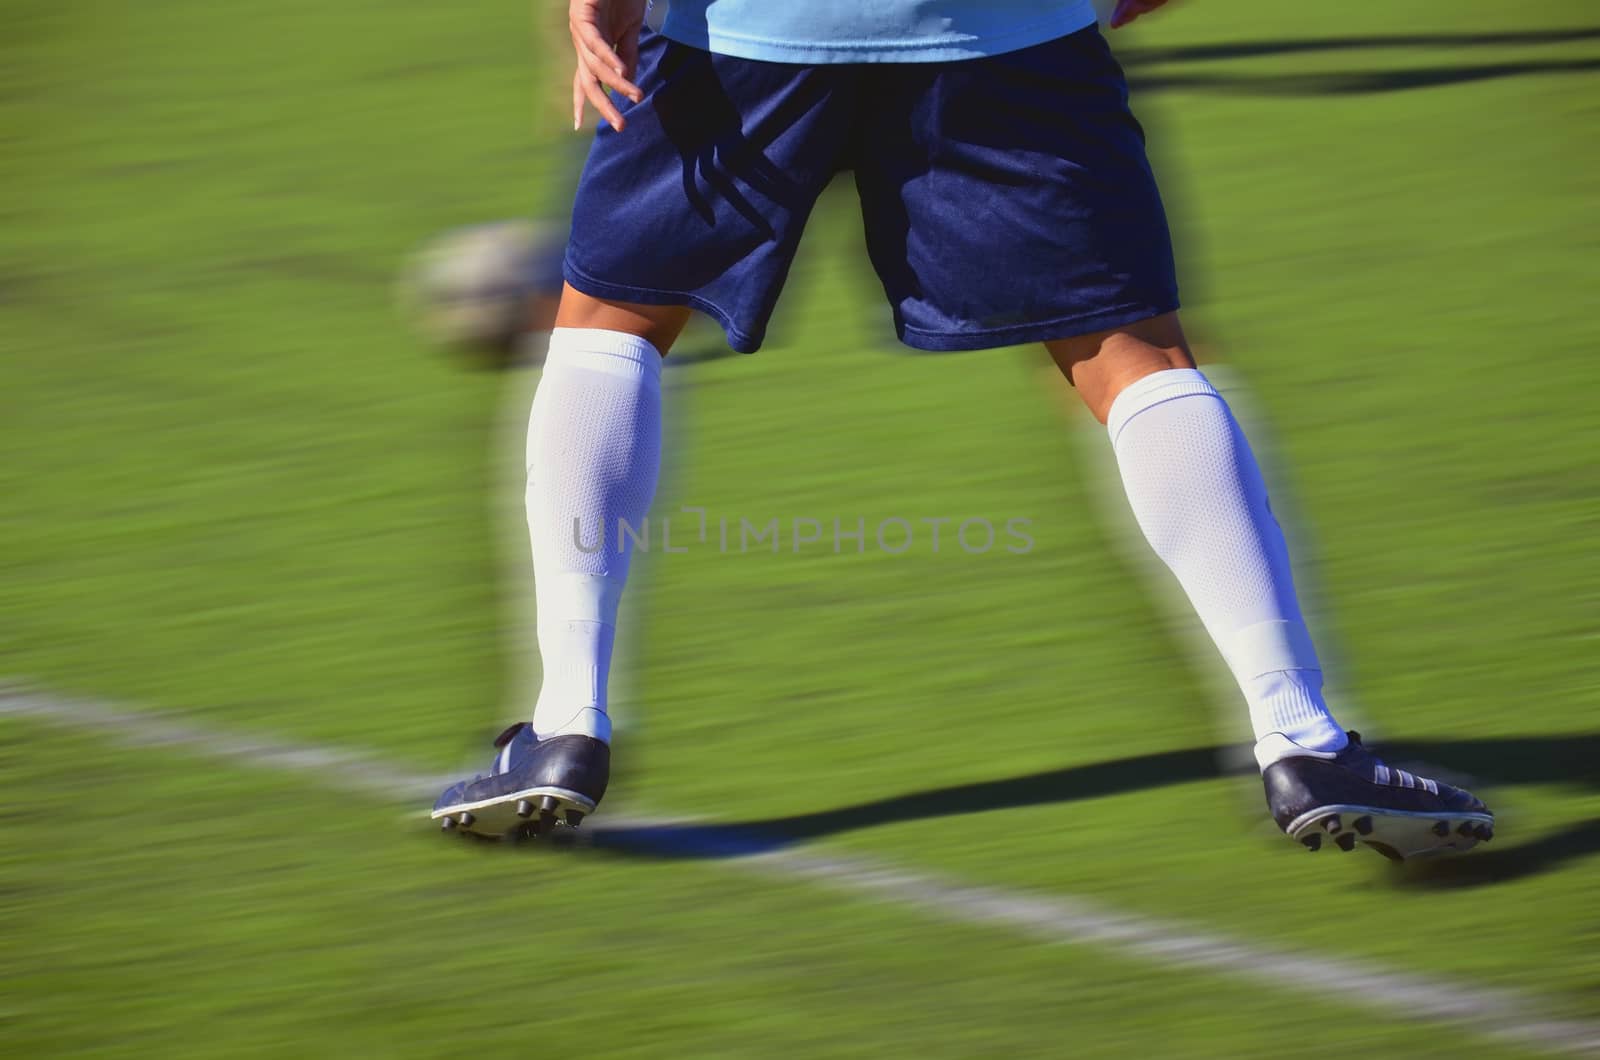 Soccer player waiting for ball